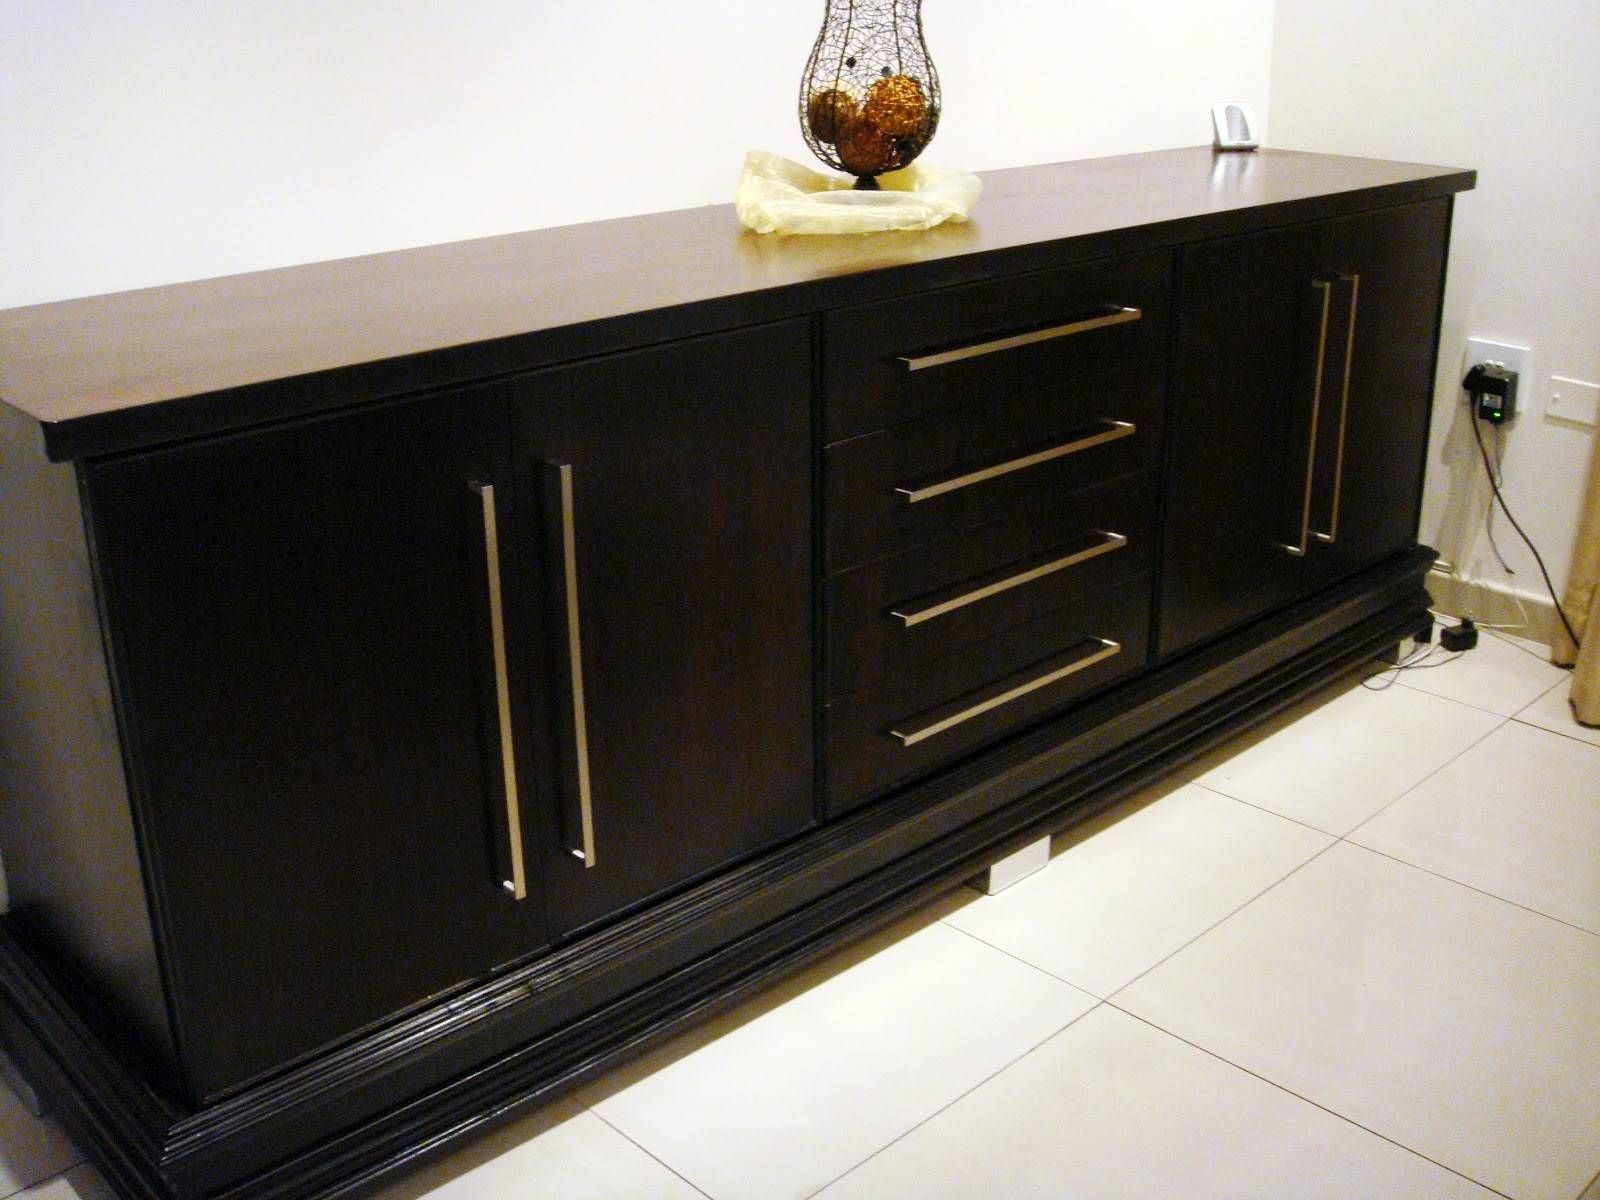 Dining Room Bar Sideboard | Latest Home Decor And Design Regarding Most Up To Date Dining Sideboards (View 3 of 15)